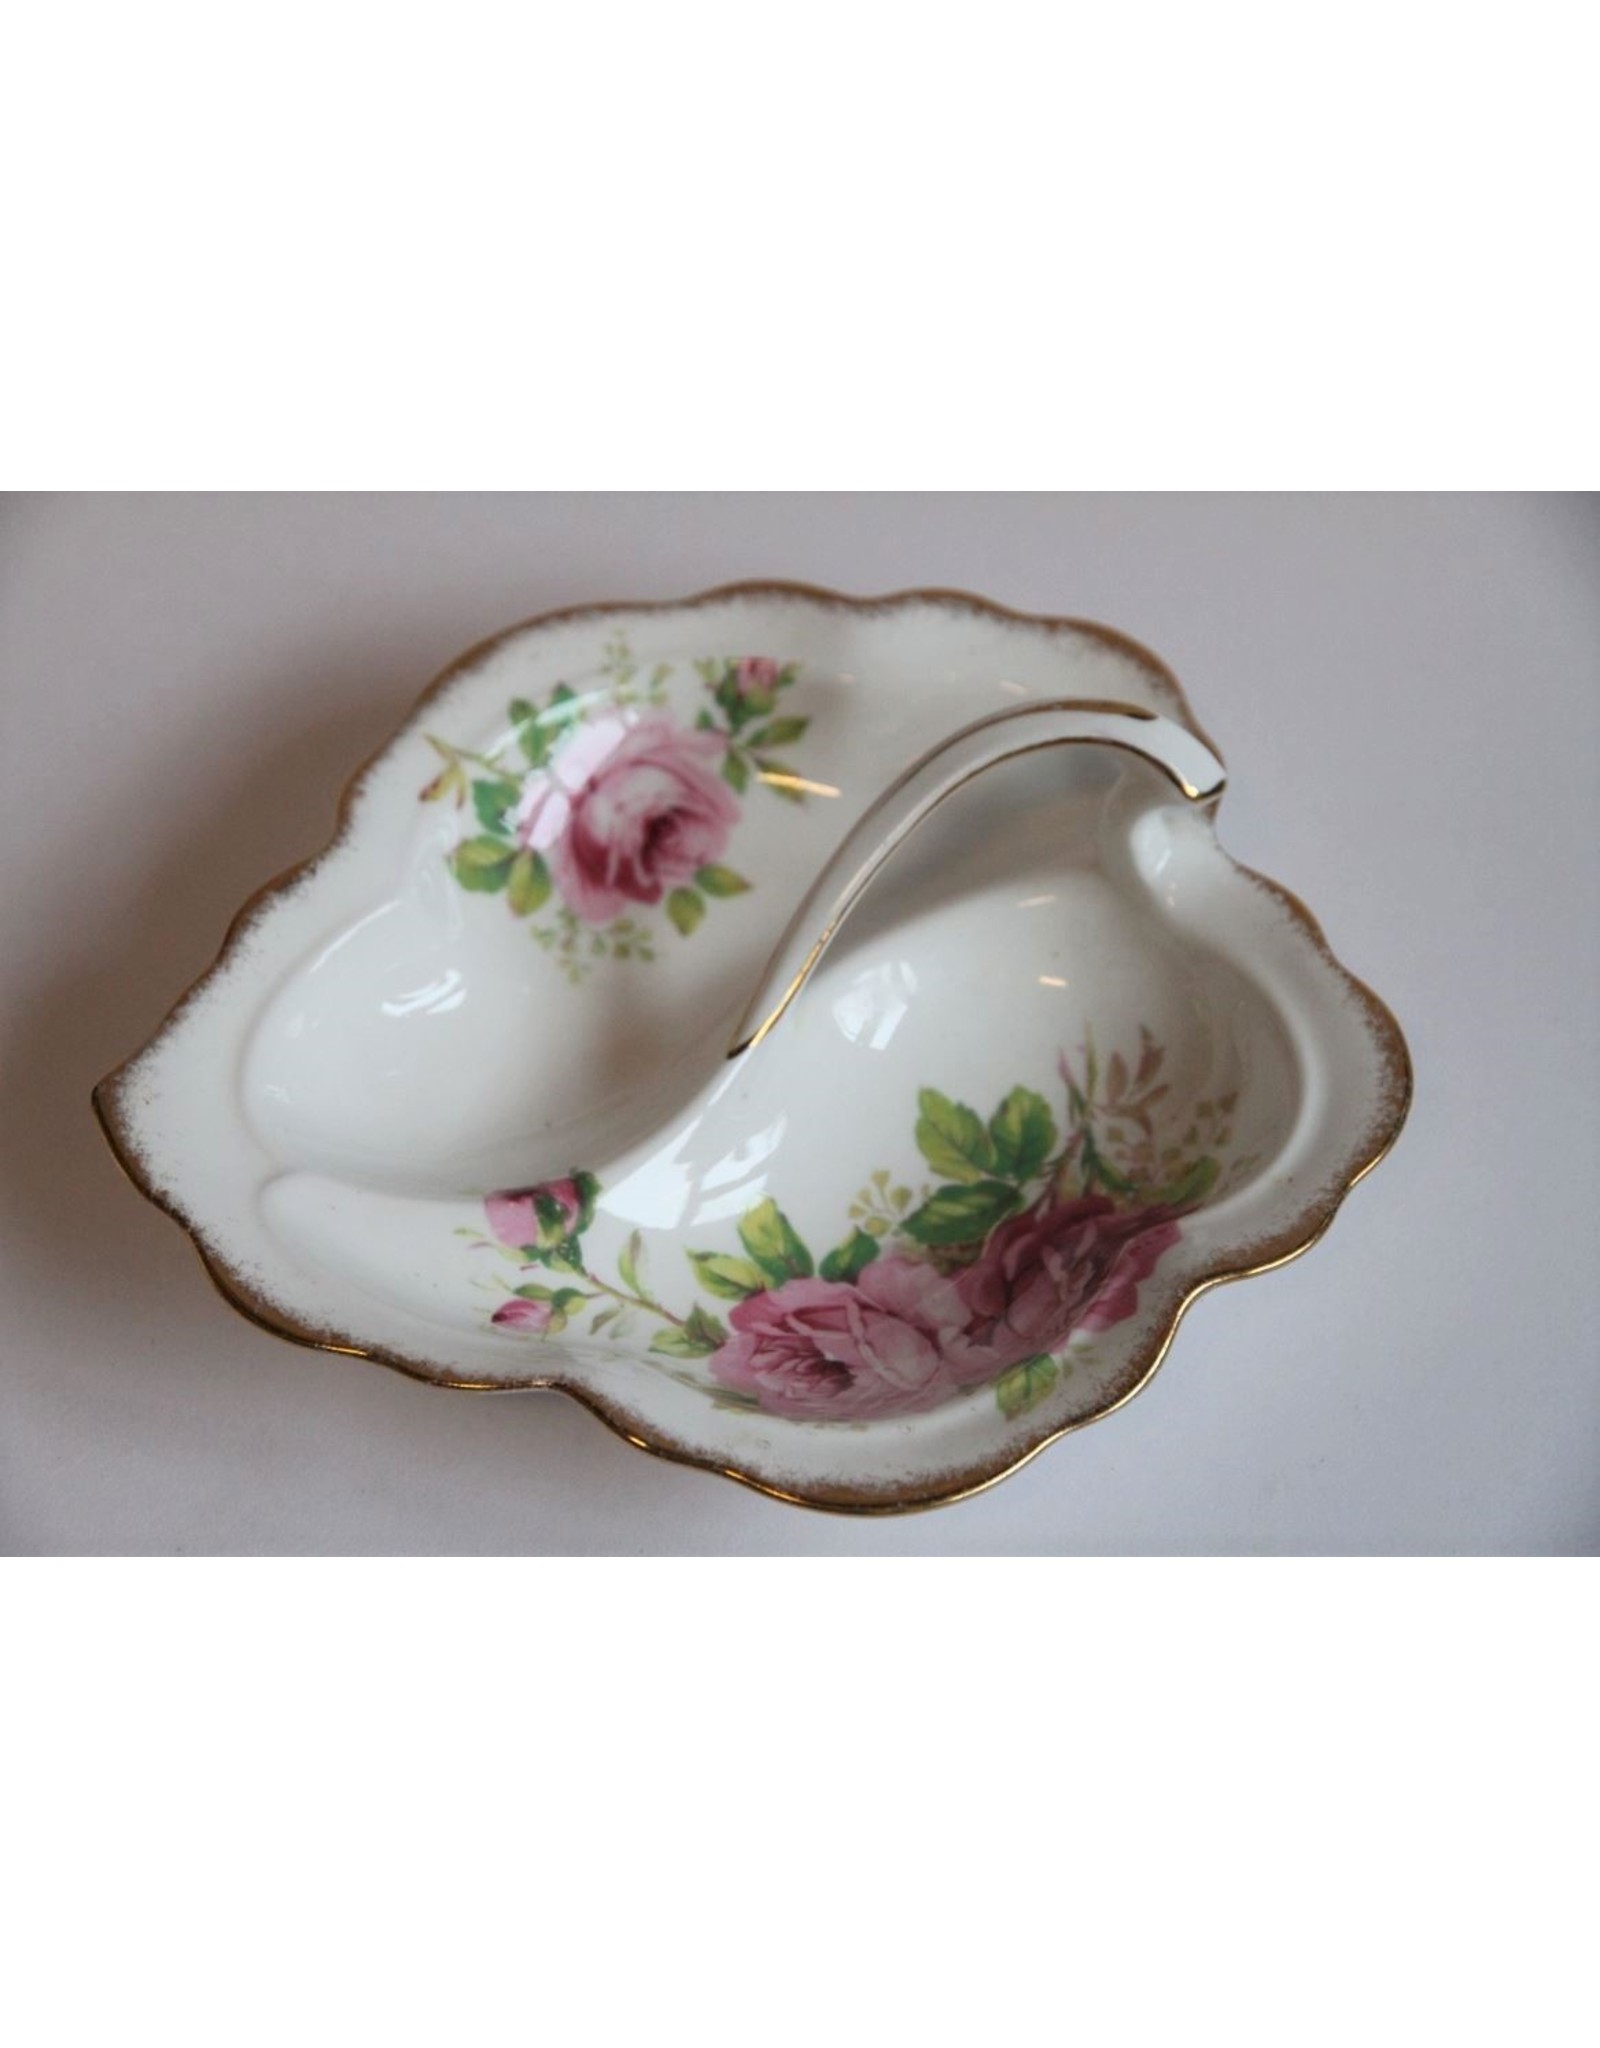 Relish dish - Royal Albert American Beauty with handle, divided, two part